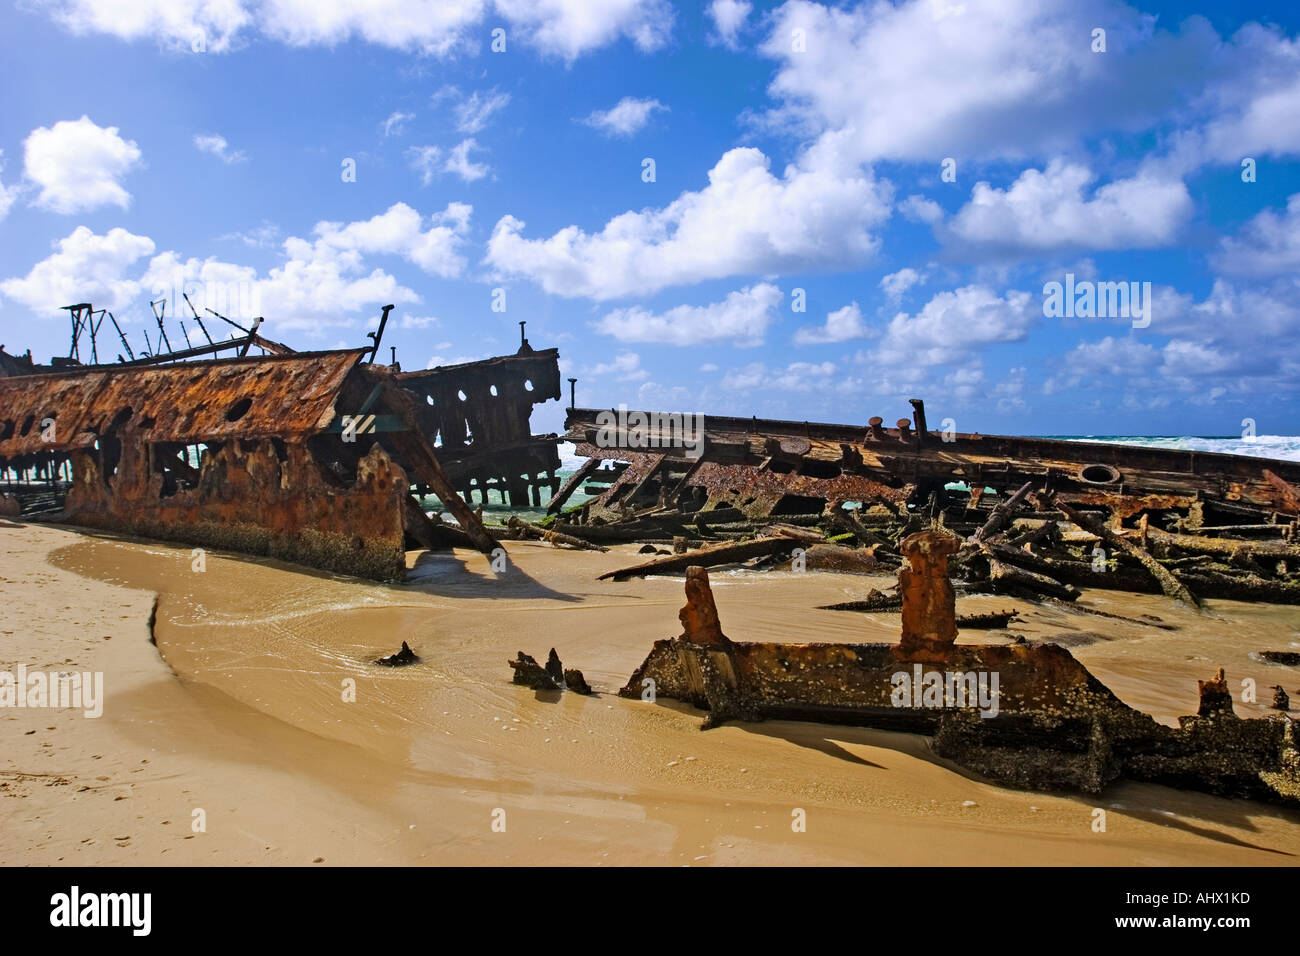 Image of the middle section of the wreck of the Maheno steam ship where its broken in half Stock Photo